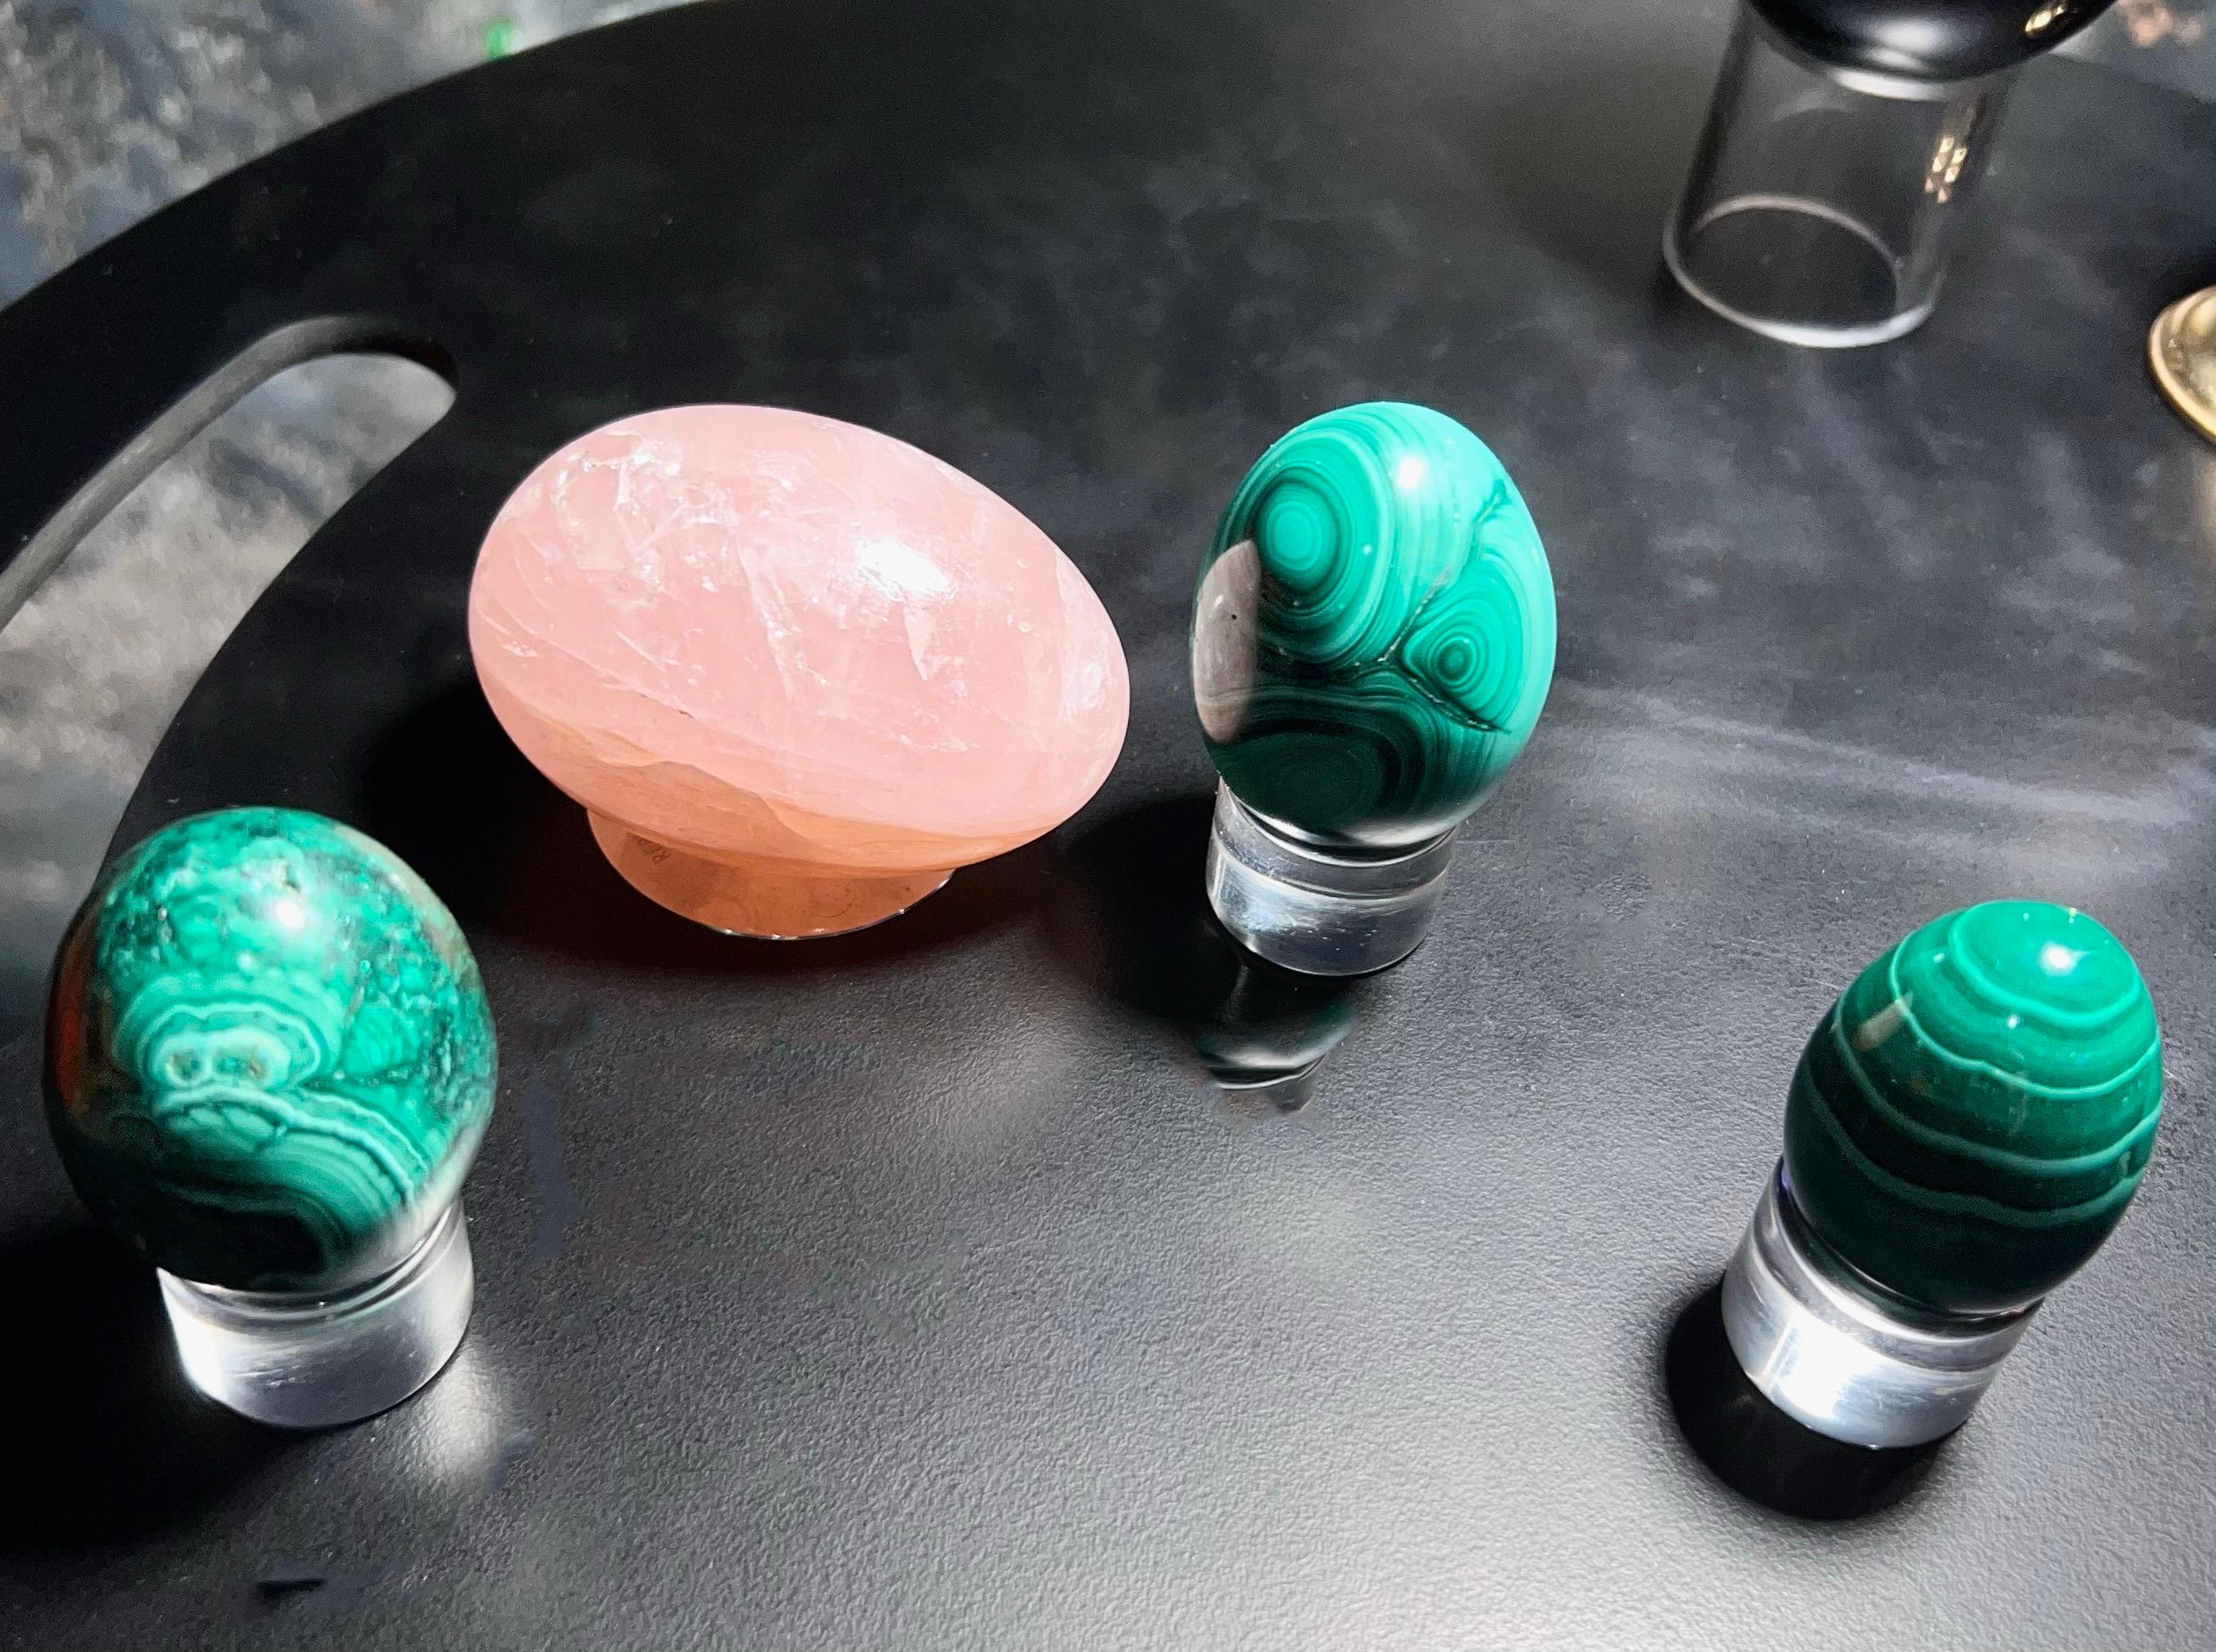 Organic Modern Hand Carved Malachite and Rose Quartz Egg Sculptural Set of 4.  Midcentury green malachite hand-burnished egg set of 3 with one large rose quartz egg. Carefully curated set with three lucite bases. 